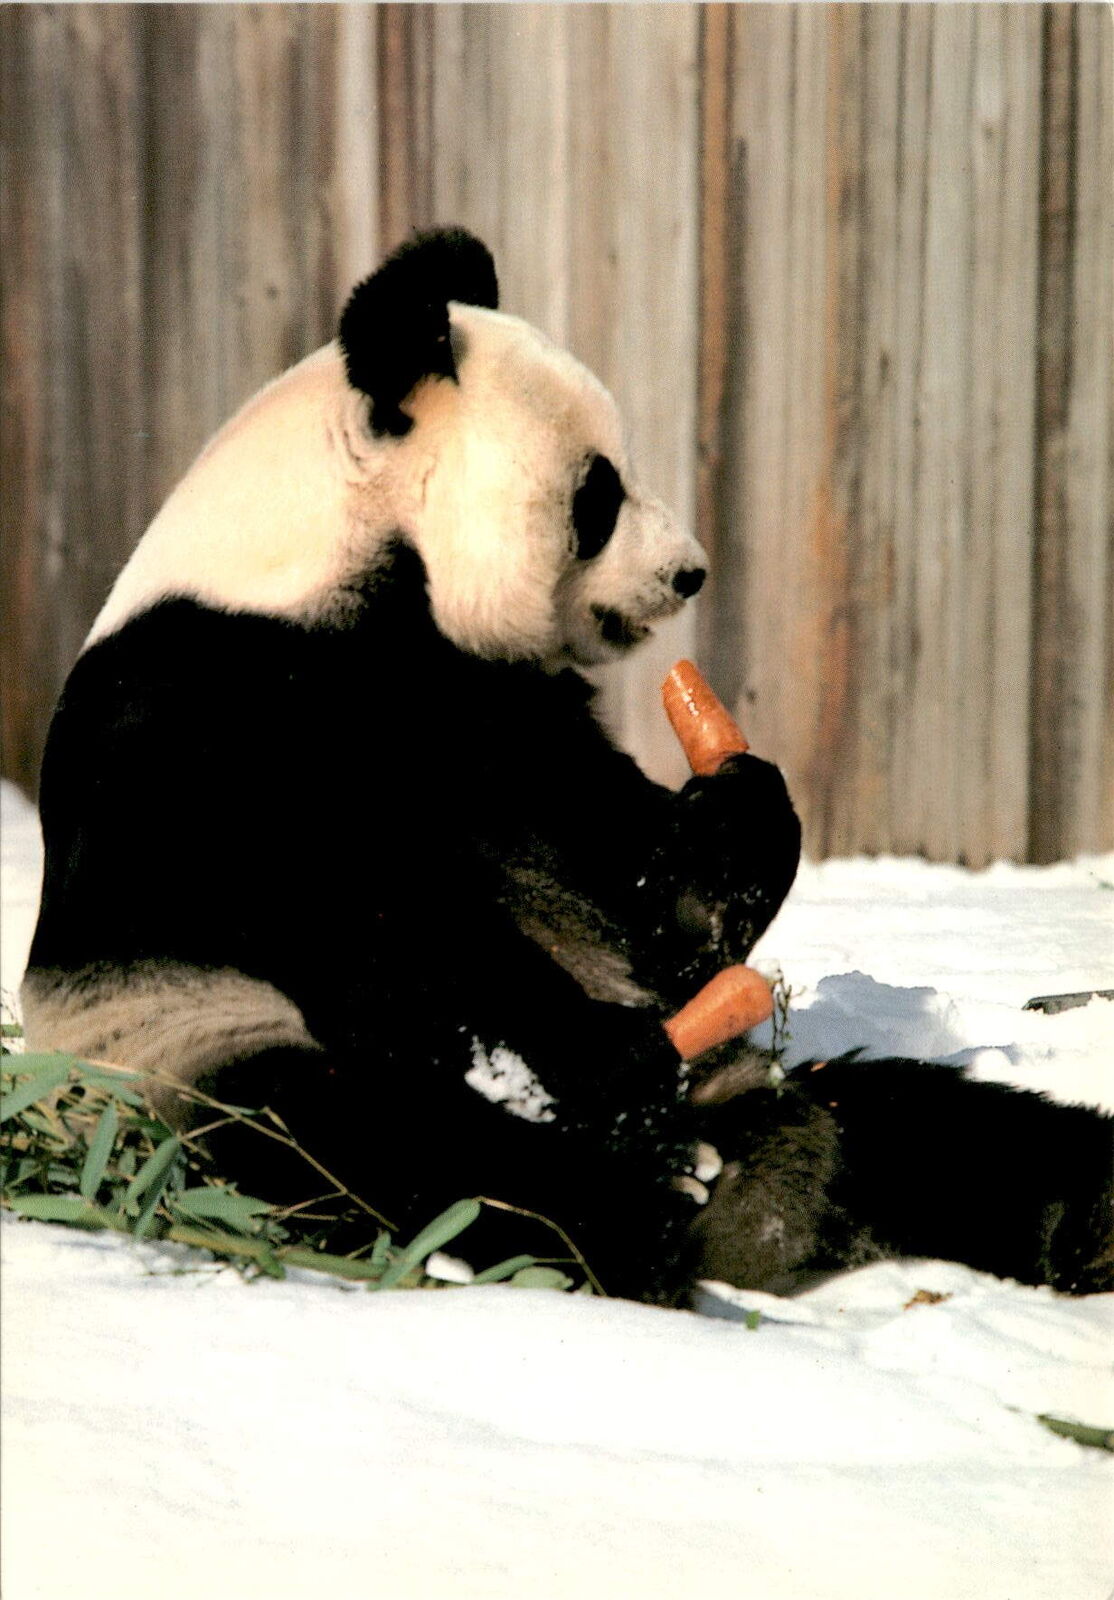 Vintage Ling-Ling Giant Panda Postcard from National Zoo